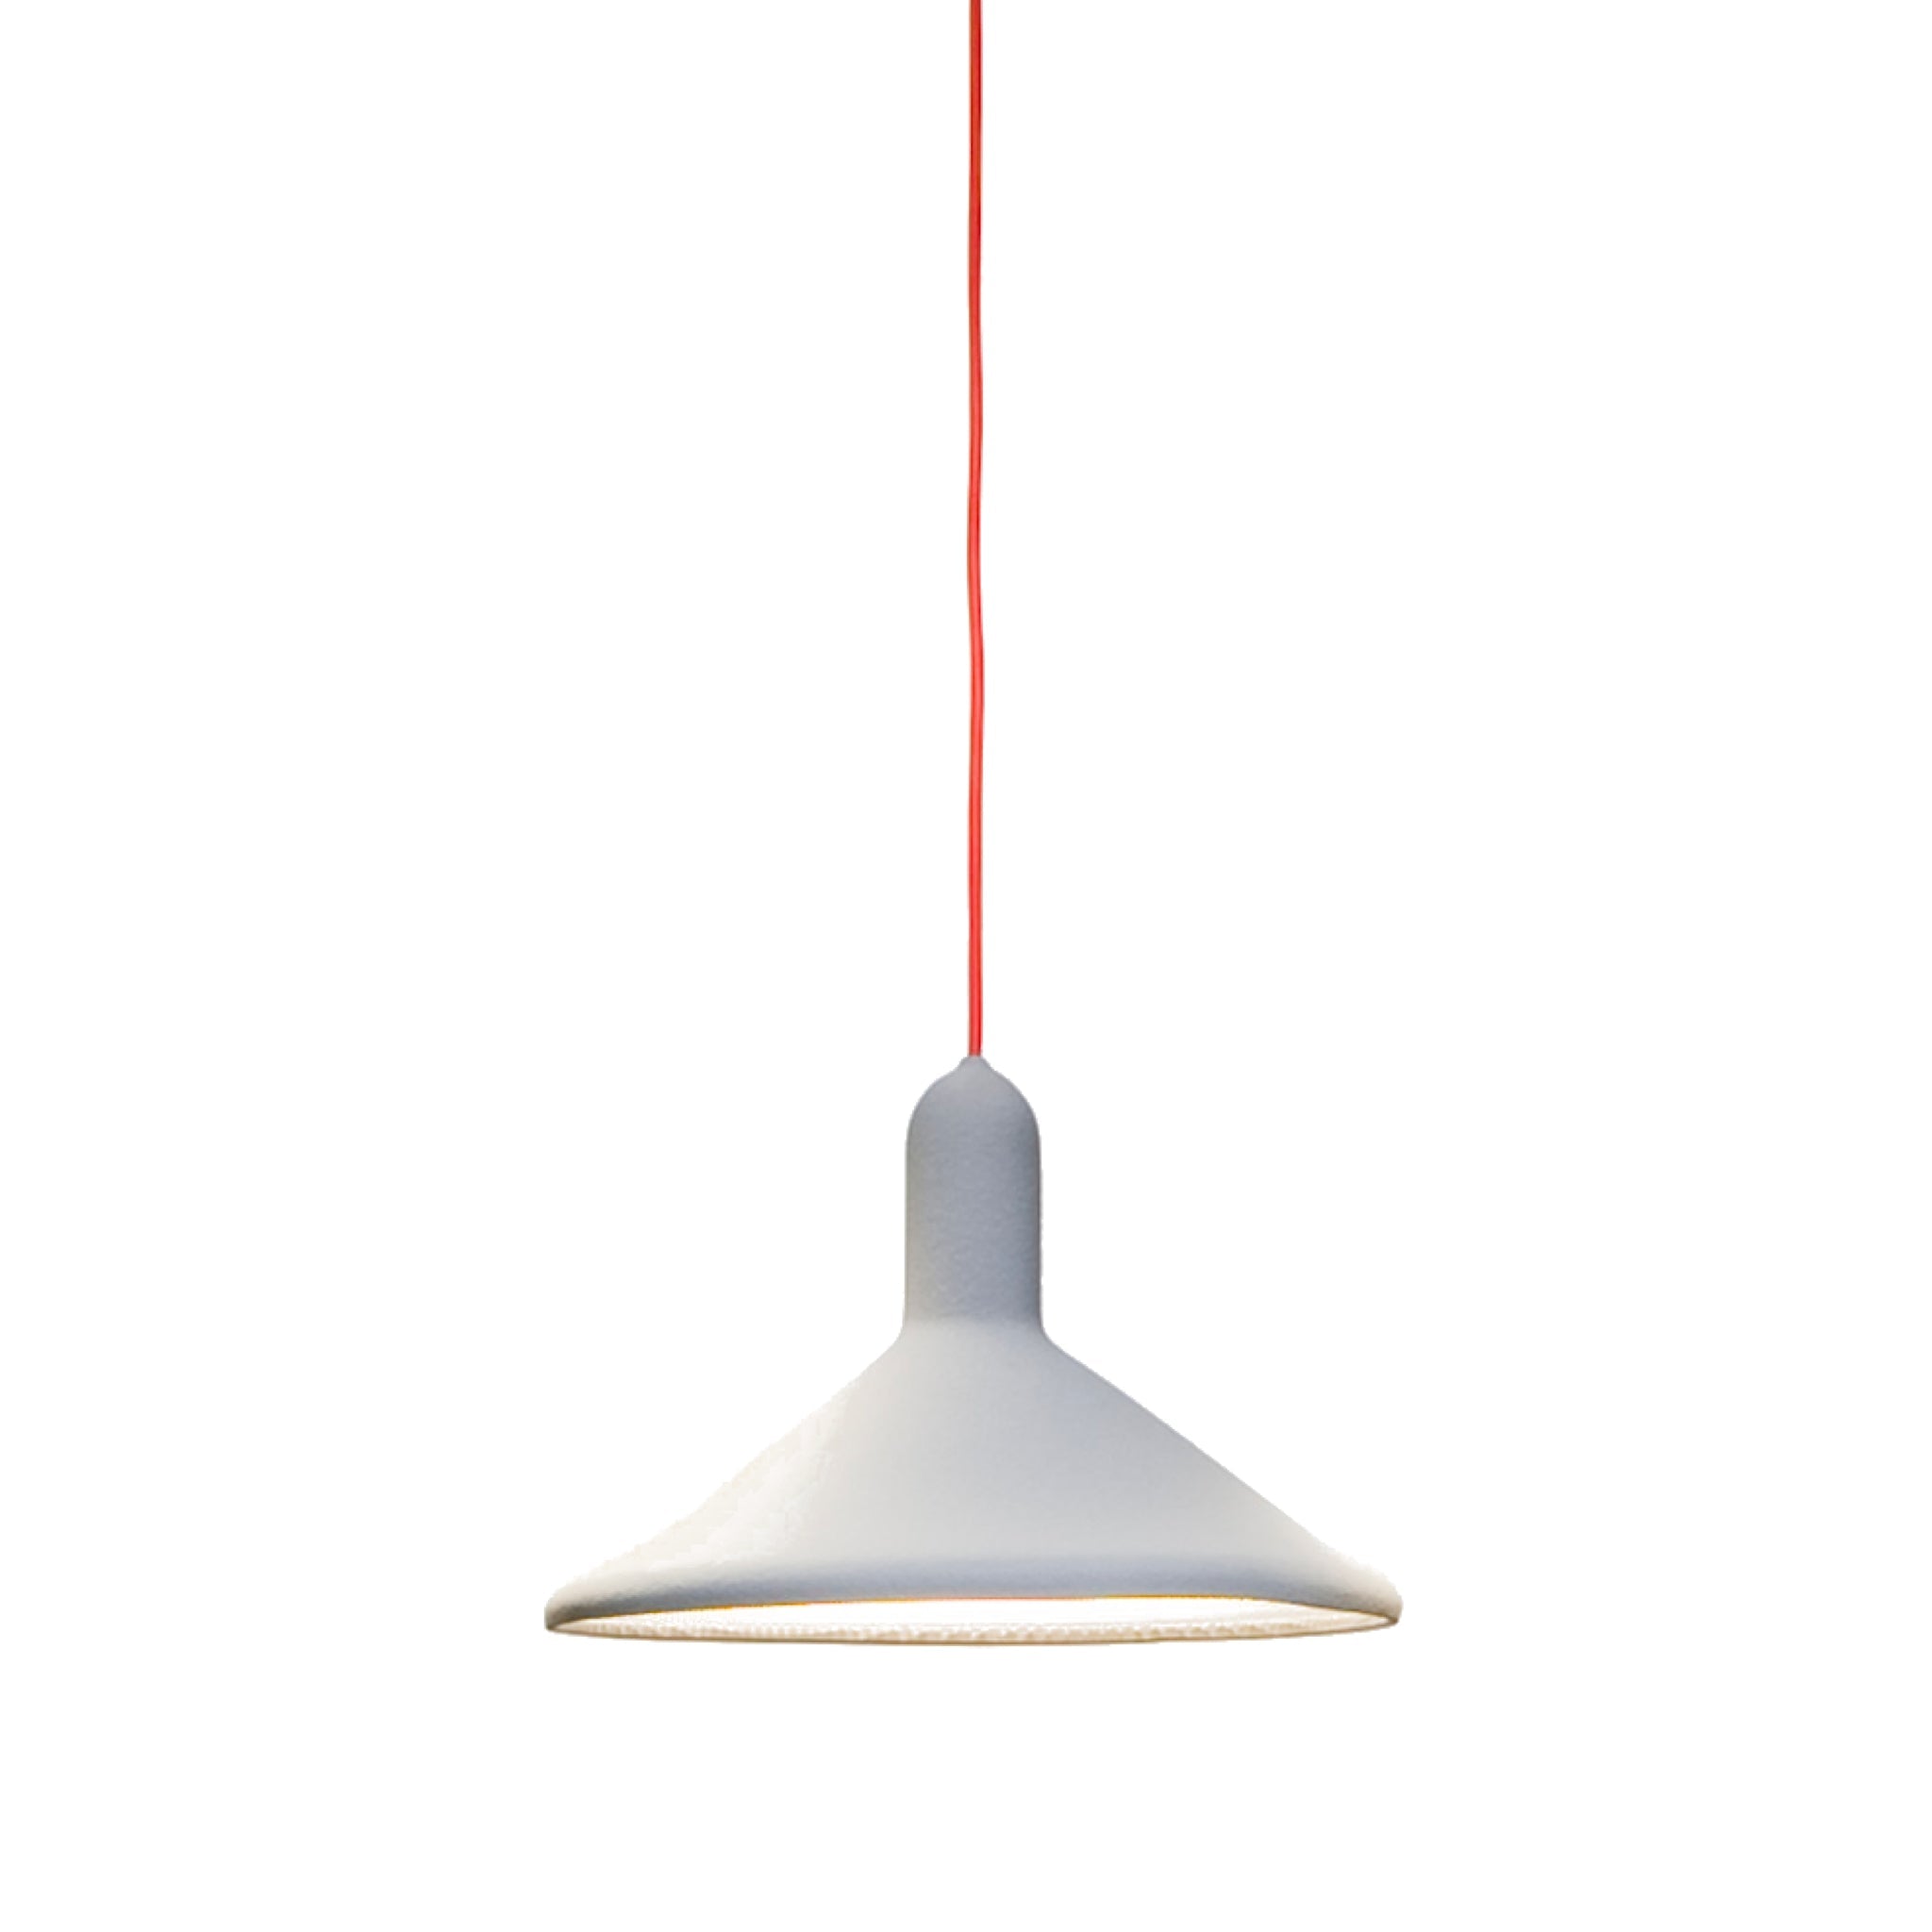 Clearance Torch Light Suspension / S3 Large Cone / Grey with Red Cable by Established & Sons